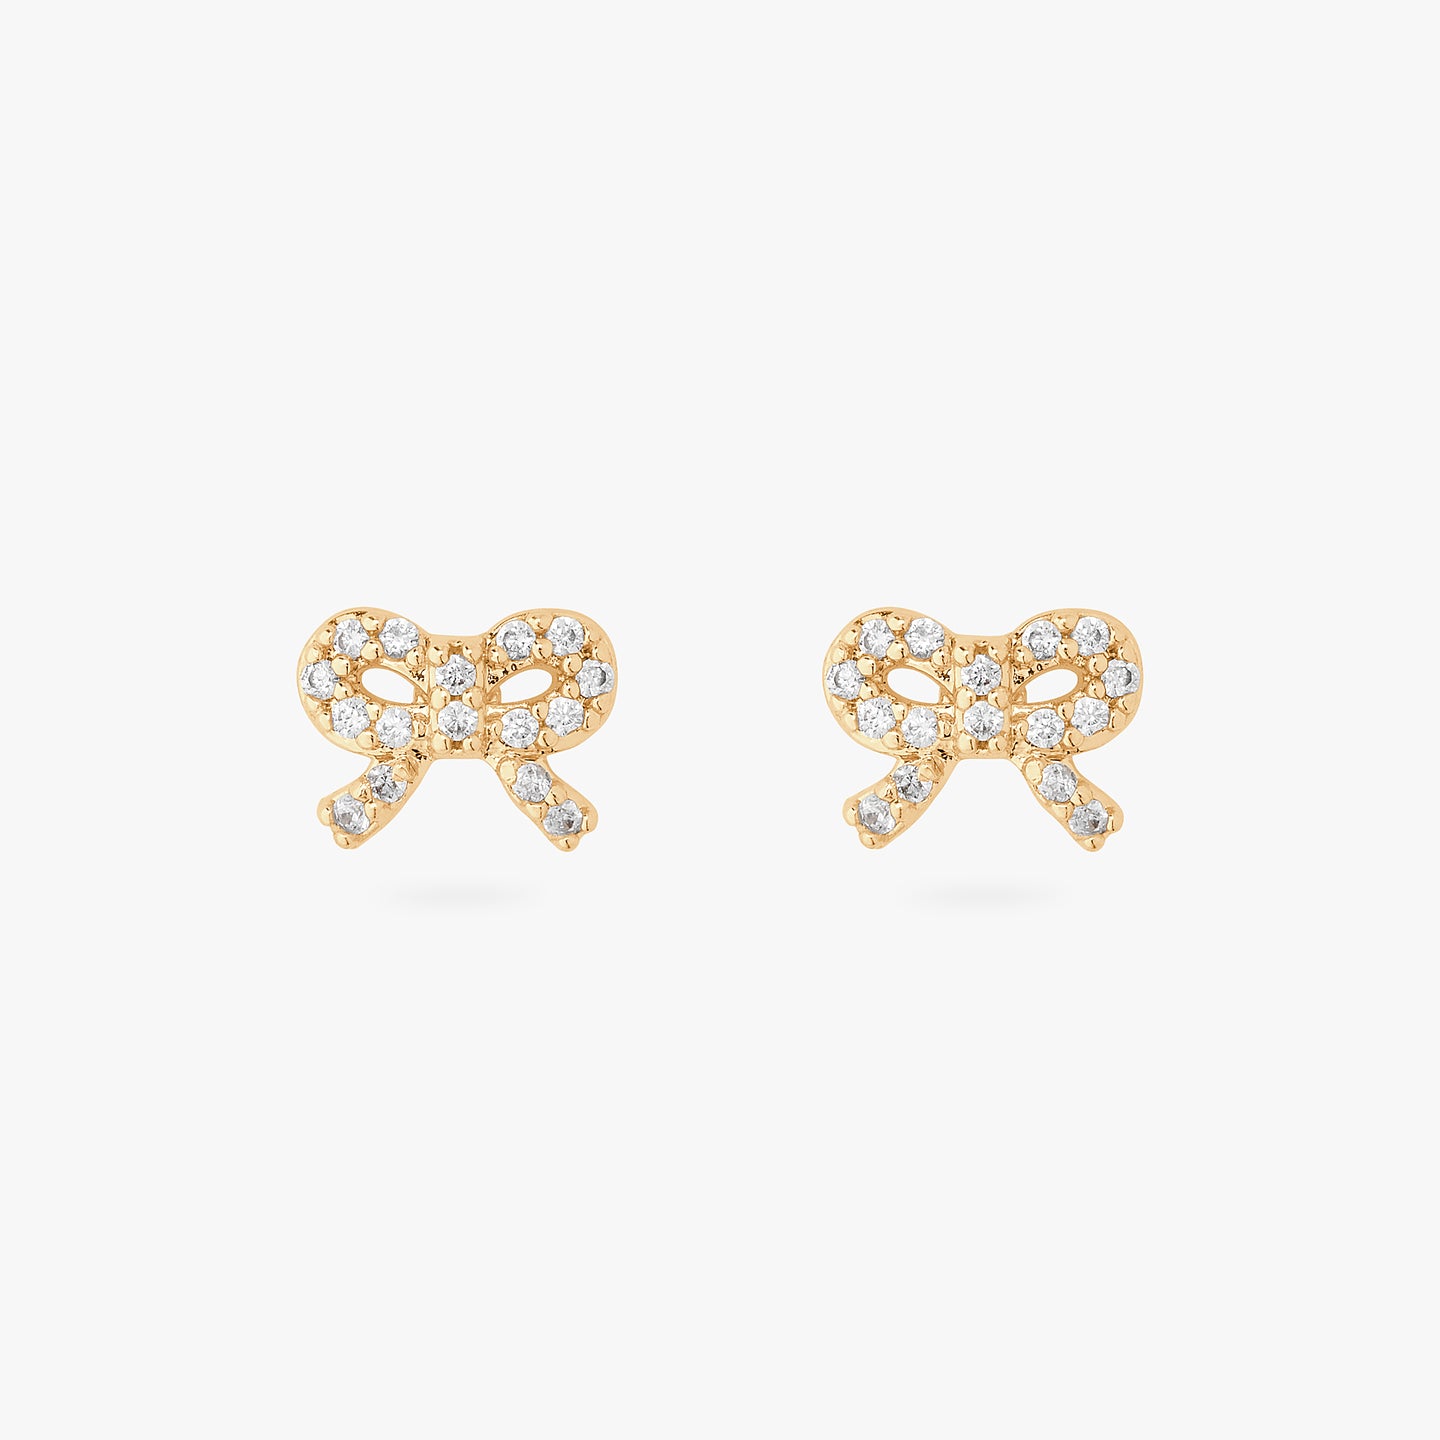 An image of a pair of gold/clear pave studs in the shape of a bow. [pair] color:null|gold/clear